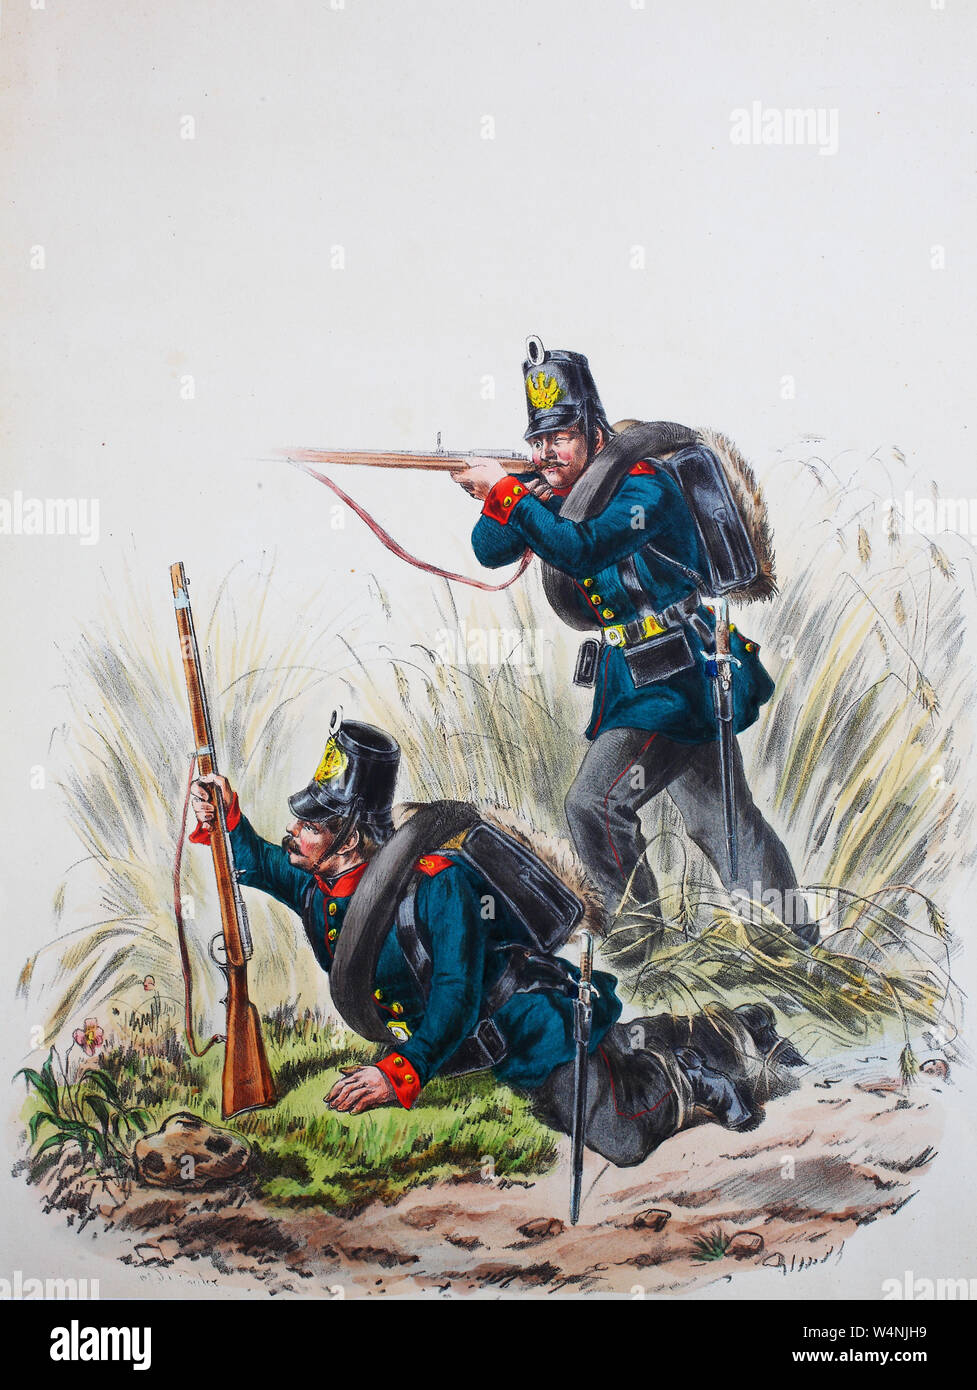 Royal Prussian Army, Guards Corps, Preußens Heer, preussische Garde, Rheinisches Jäger-Bataillon No.8, Ostpreussisches Jäger-Bataillon No.1, Soldaten, Digital improved reproduction of an illustration from the 19th century Stock Photo